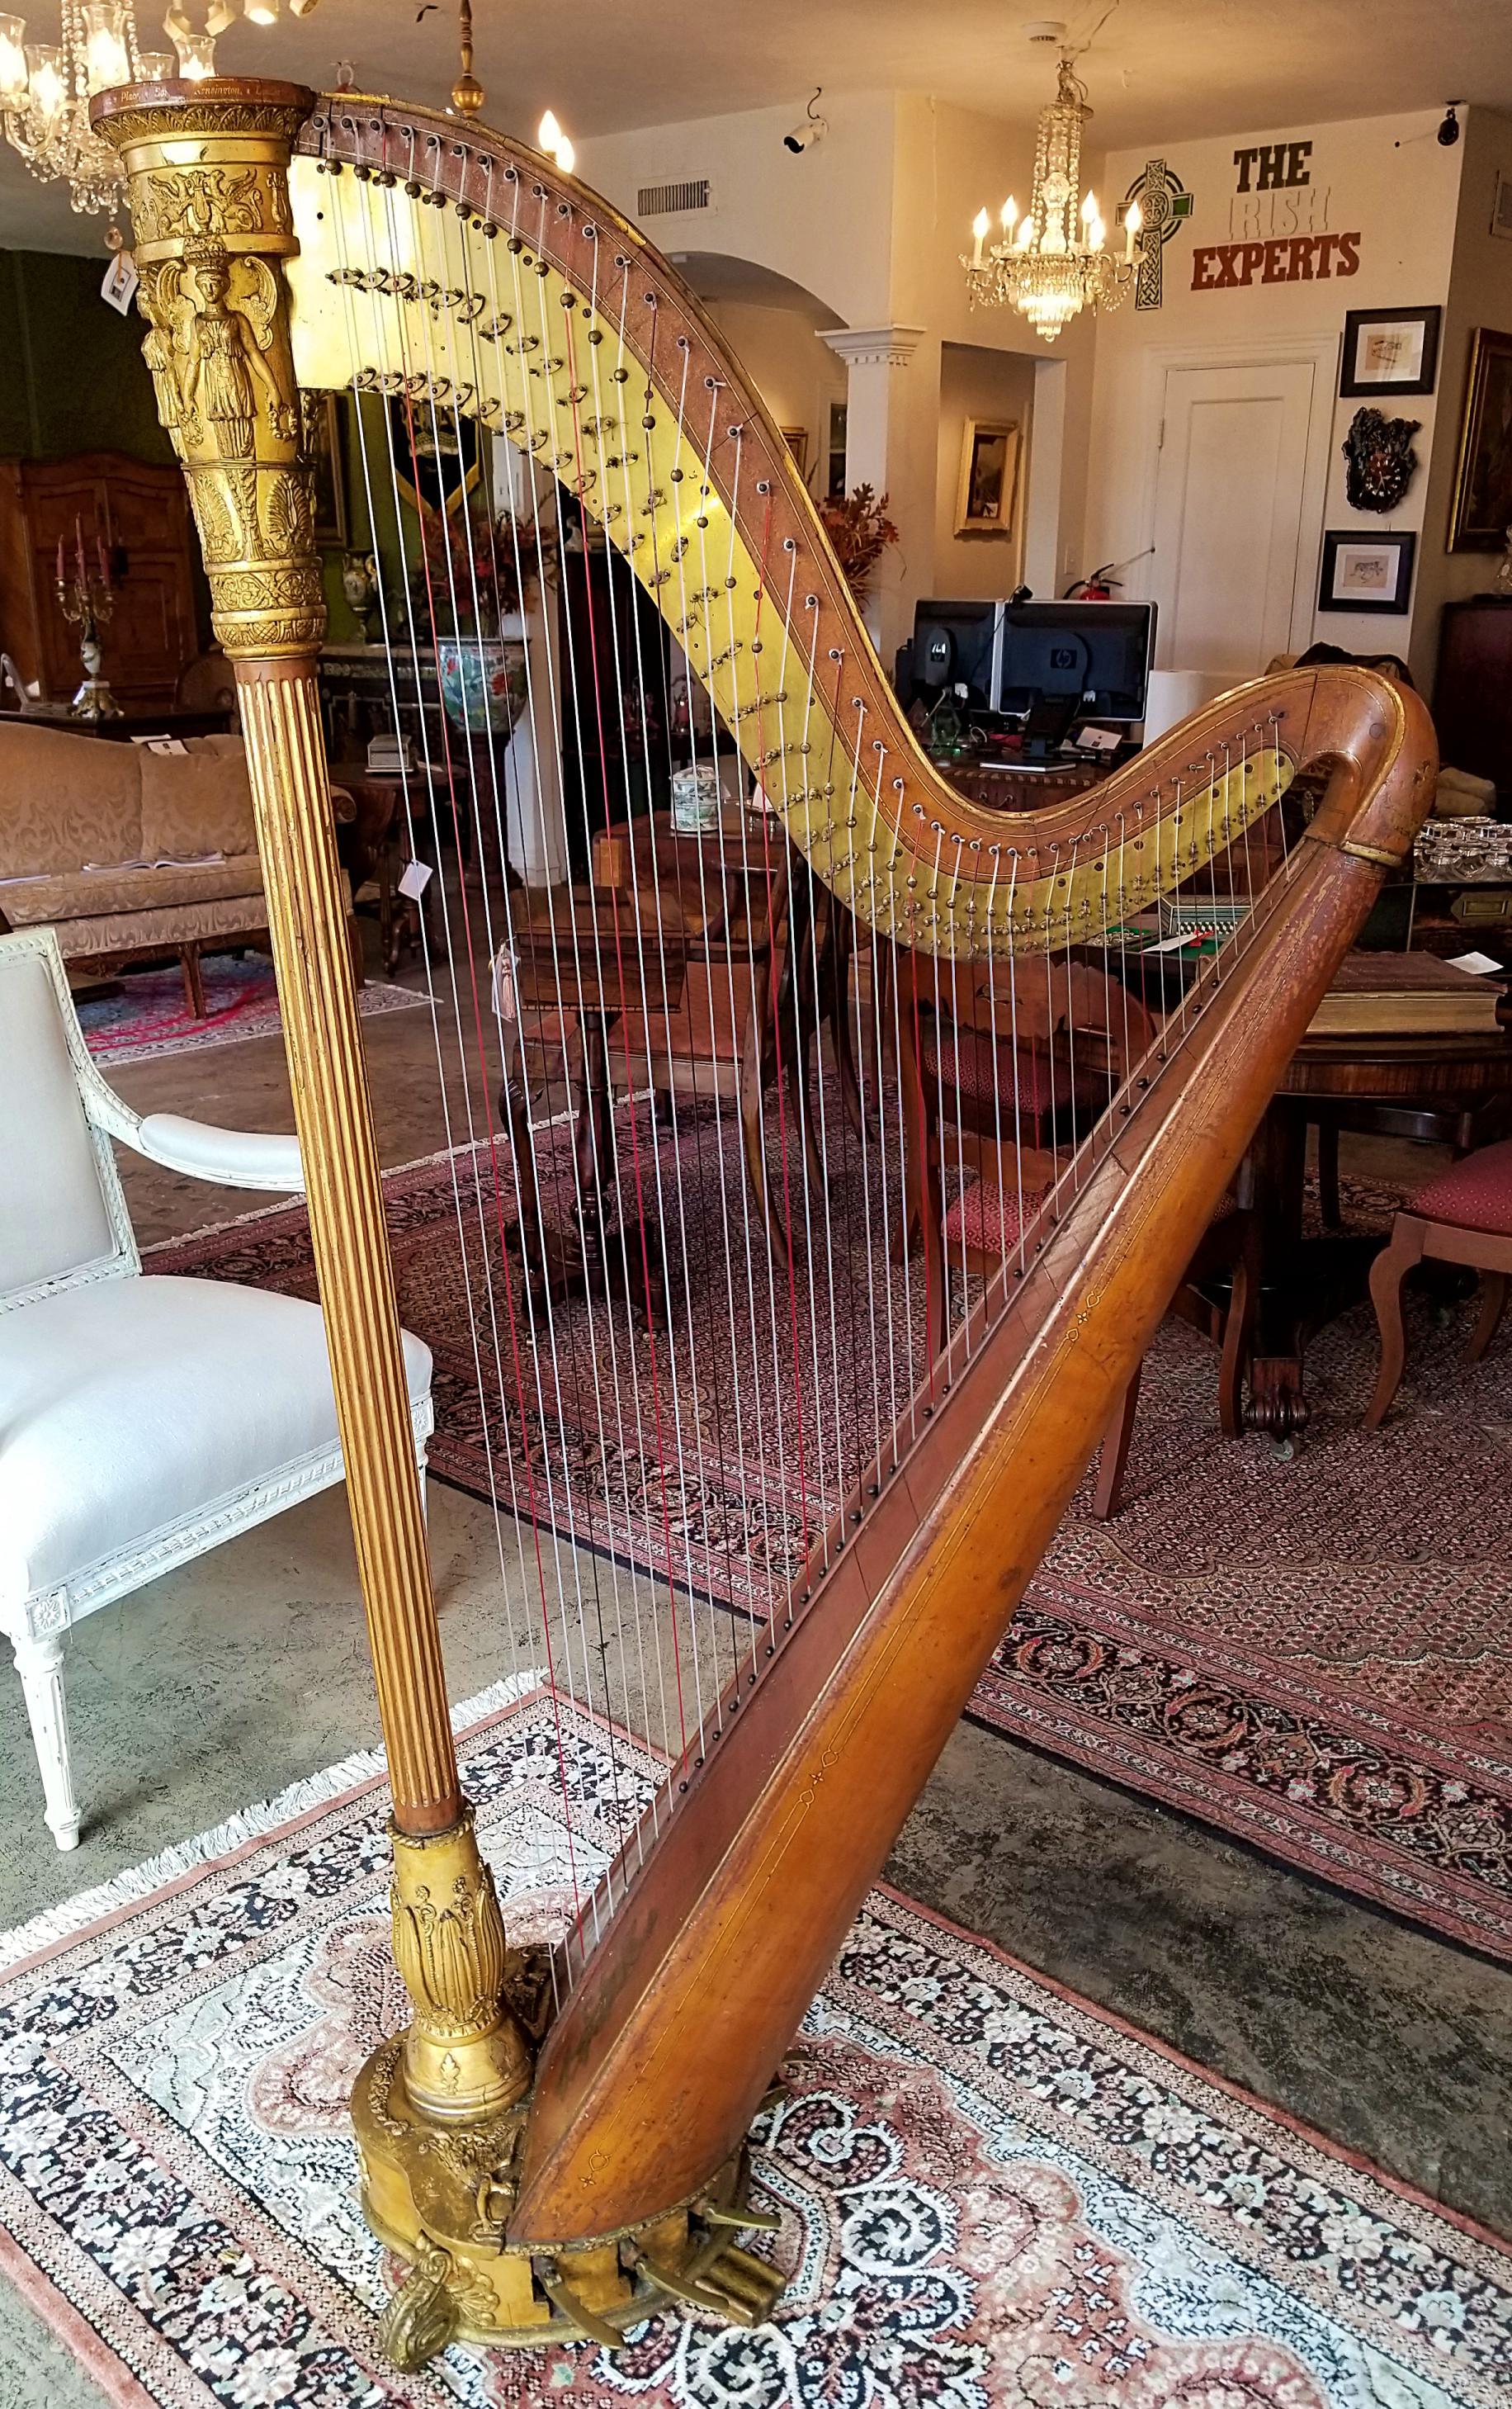 Presenting a gorgeous Mid-19th century harp by Thomas Dodd & Sons of 3 Berners Street, London from circa 1840-1850.

Stunning neoclassical gilt mounts and inlay to head and base. Made of satinwood with gilt stringing.

Solid brass to the stringing